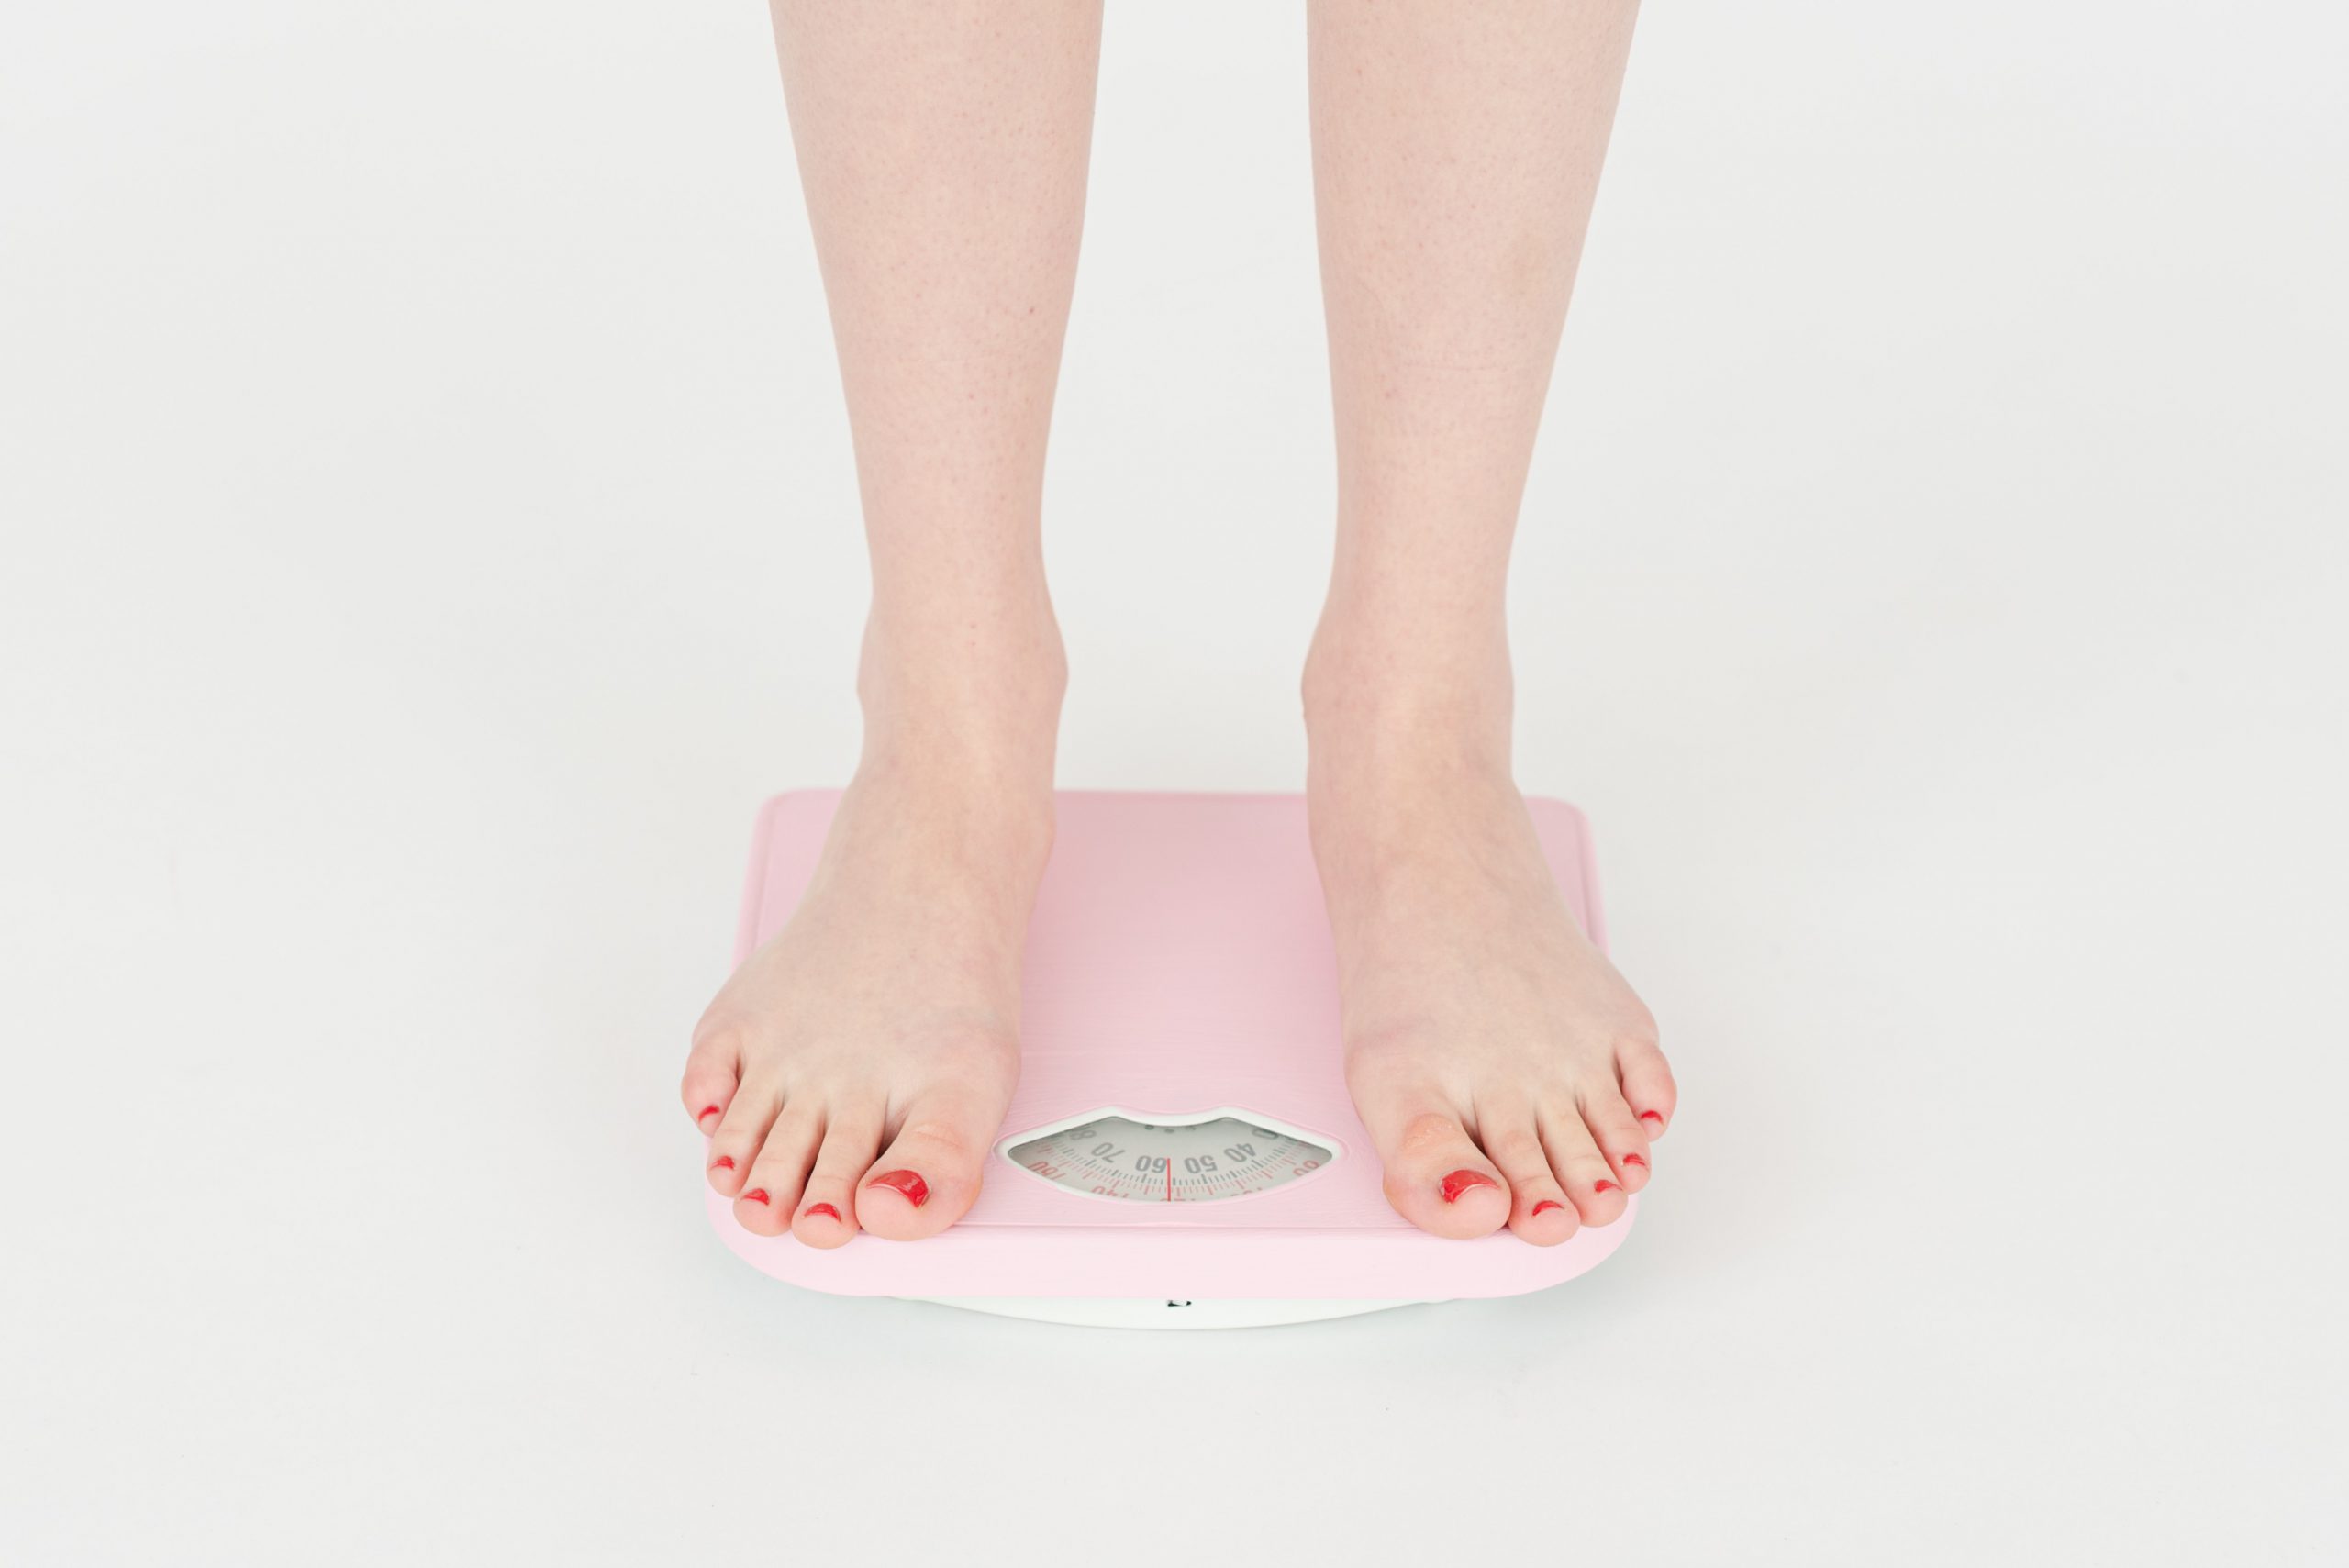 Woman's feet standing on scale